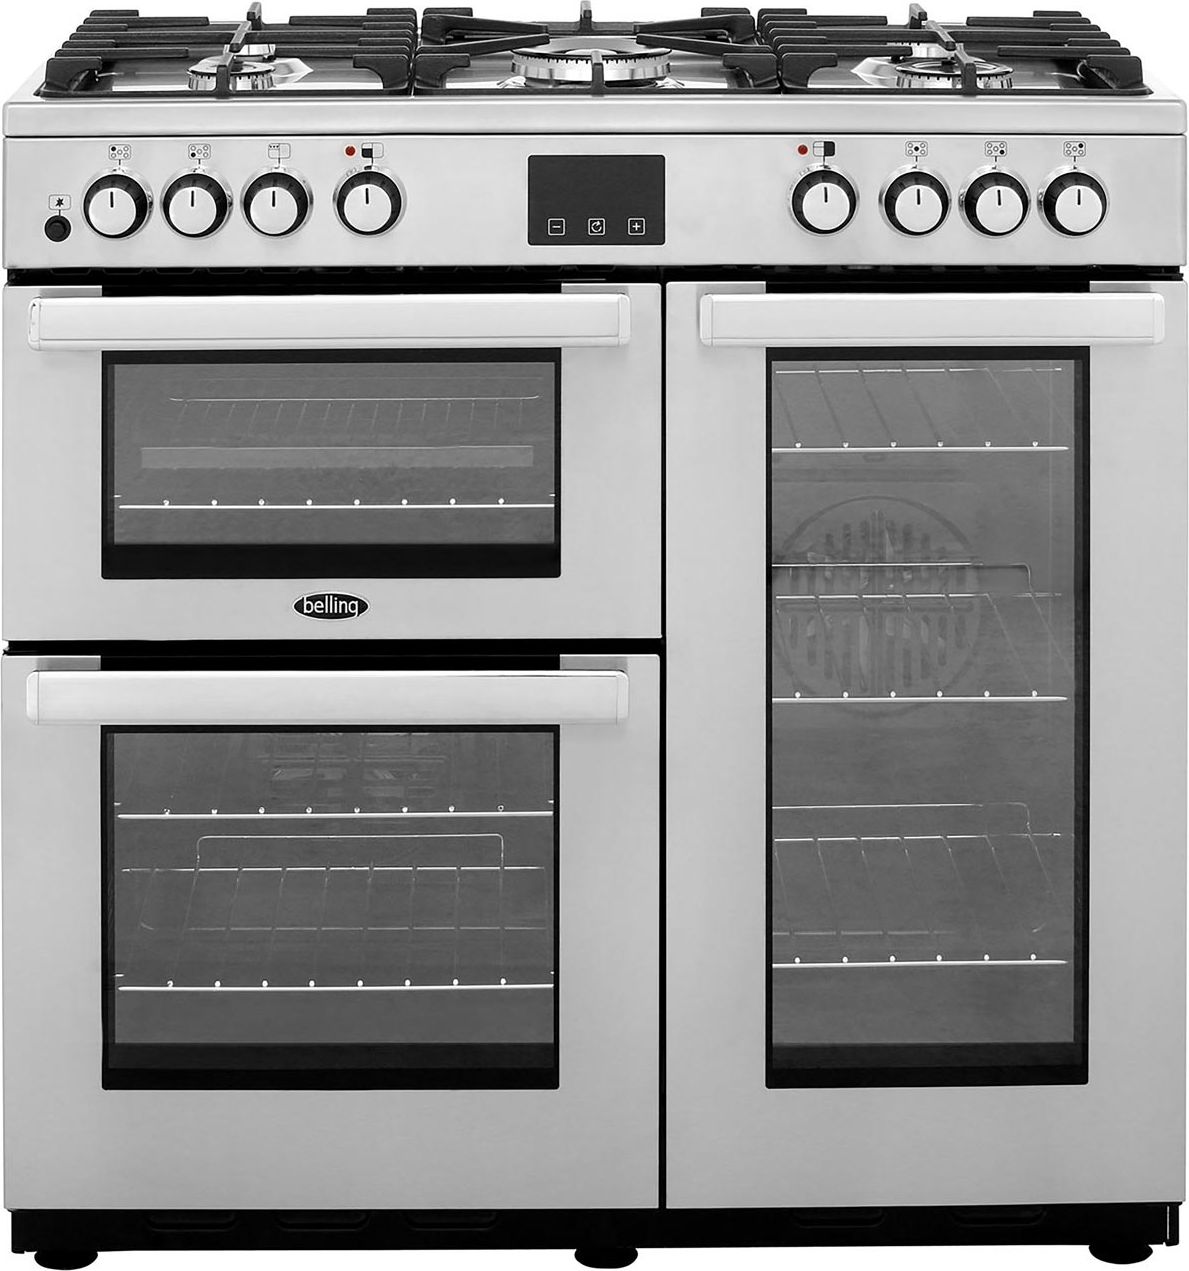 Belling Cookcentre90DFTProf 90cm Dual Fuel Range Cooker - Stainless Steel - A/A Rated, Stainless Steel